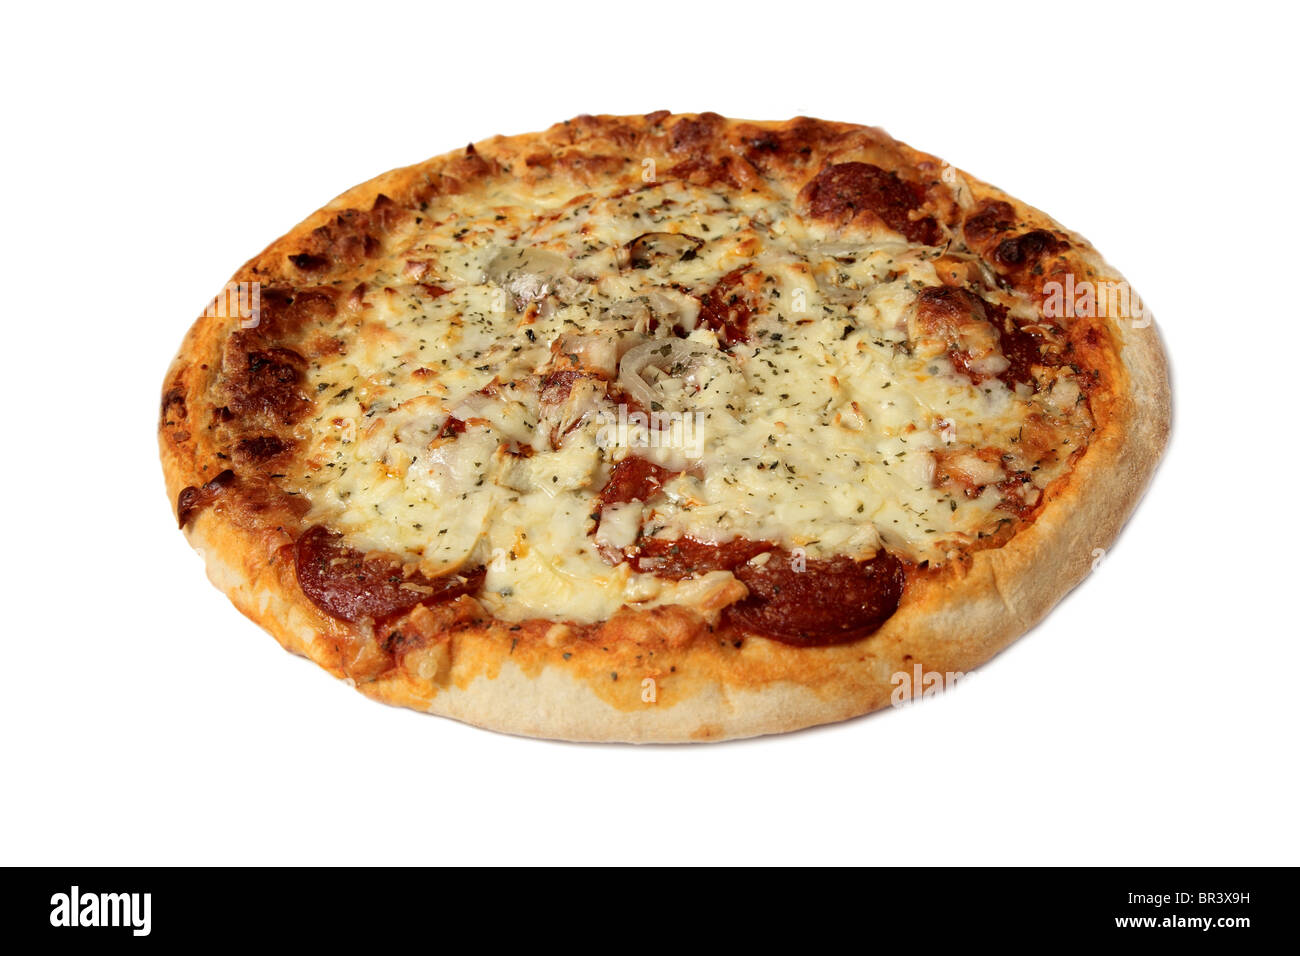 A whole Pepperoni Pizza on a white background Stock Photo